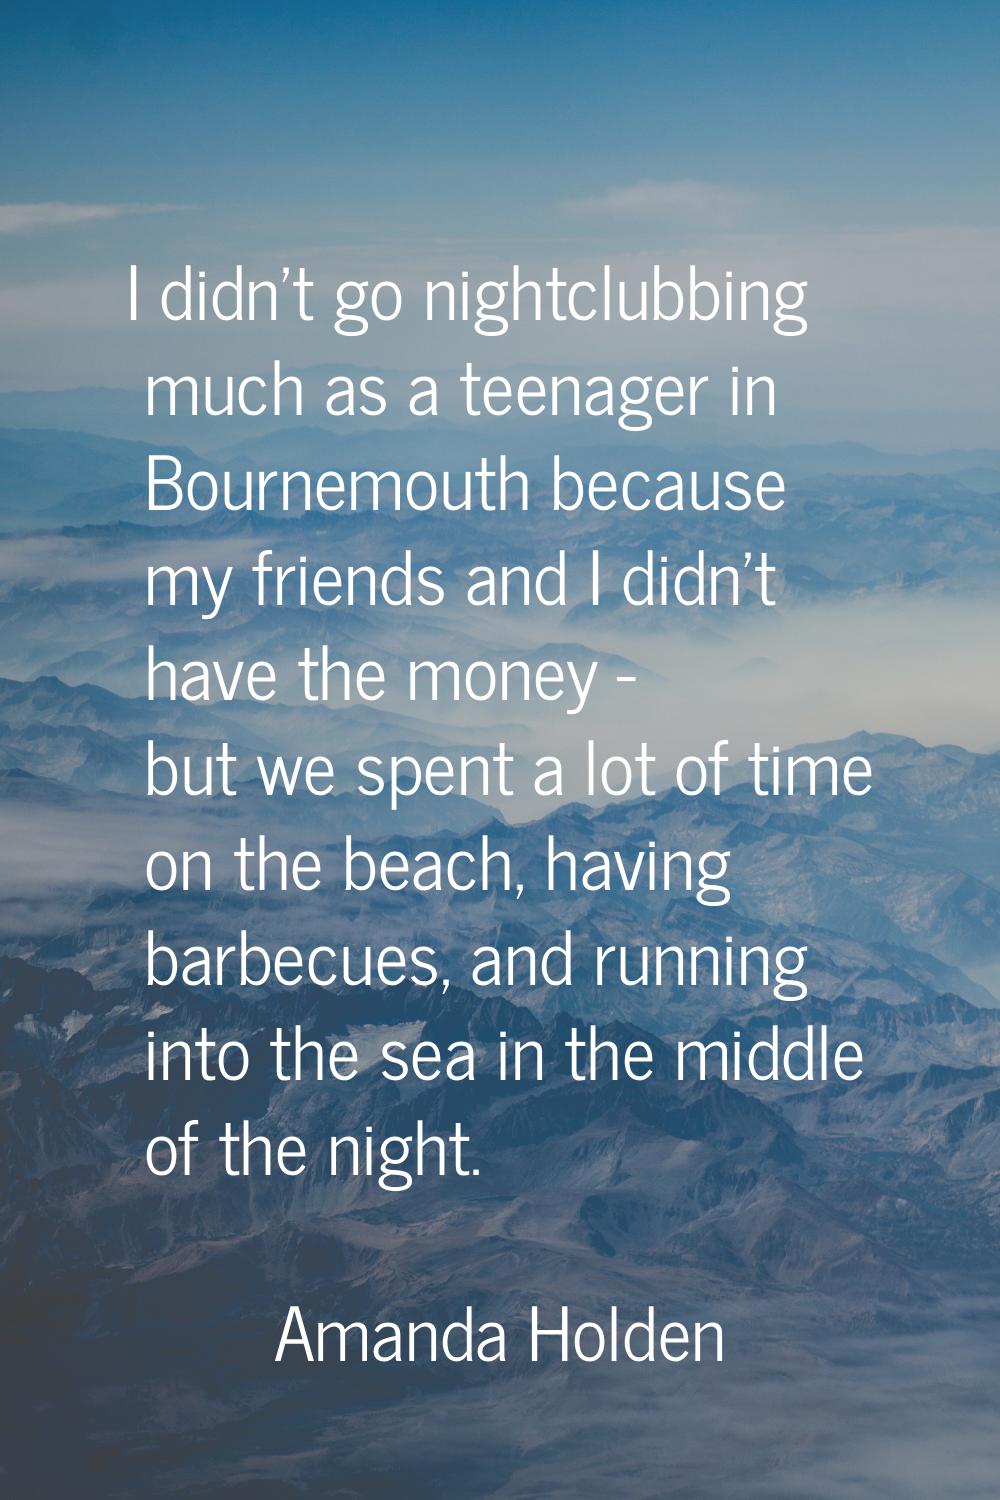 I didn't go nightclubbing much as a teenager in Bournemouth because my friends and I didn't have th